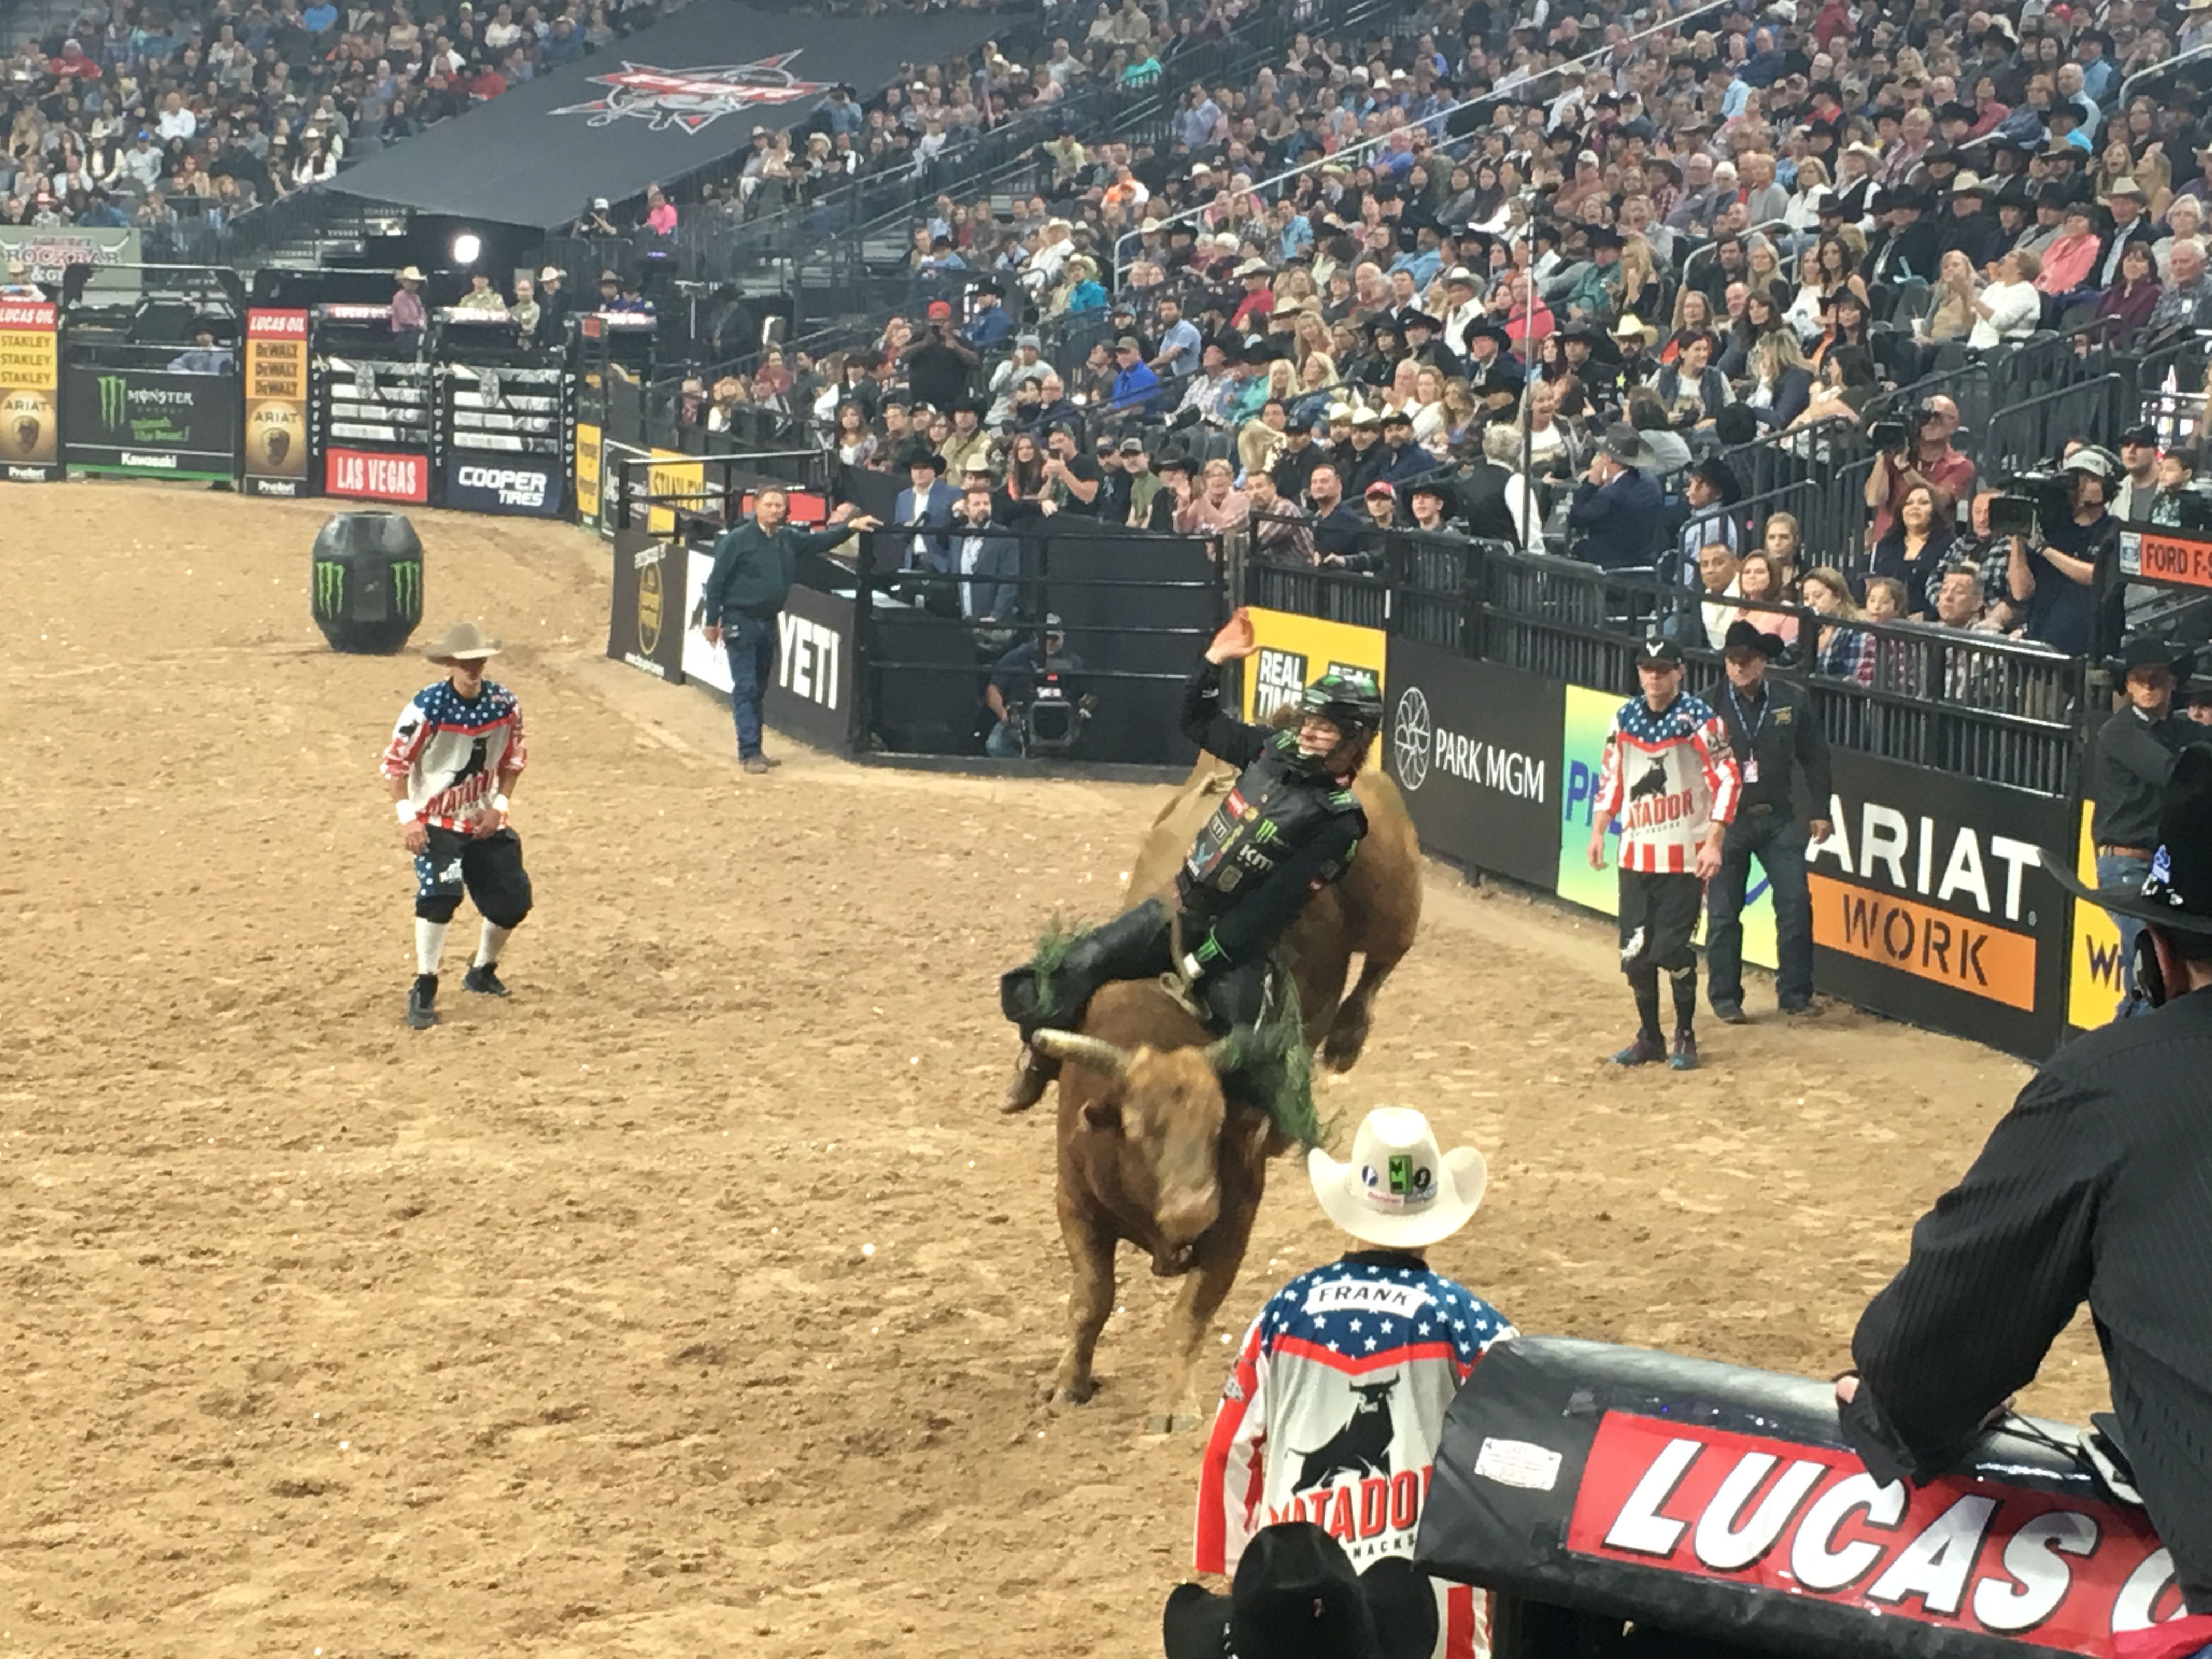 PBR World Finals Means It's Time for Cowboys (the Real Ones) in Las